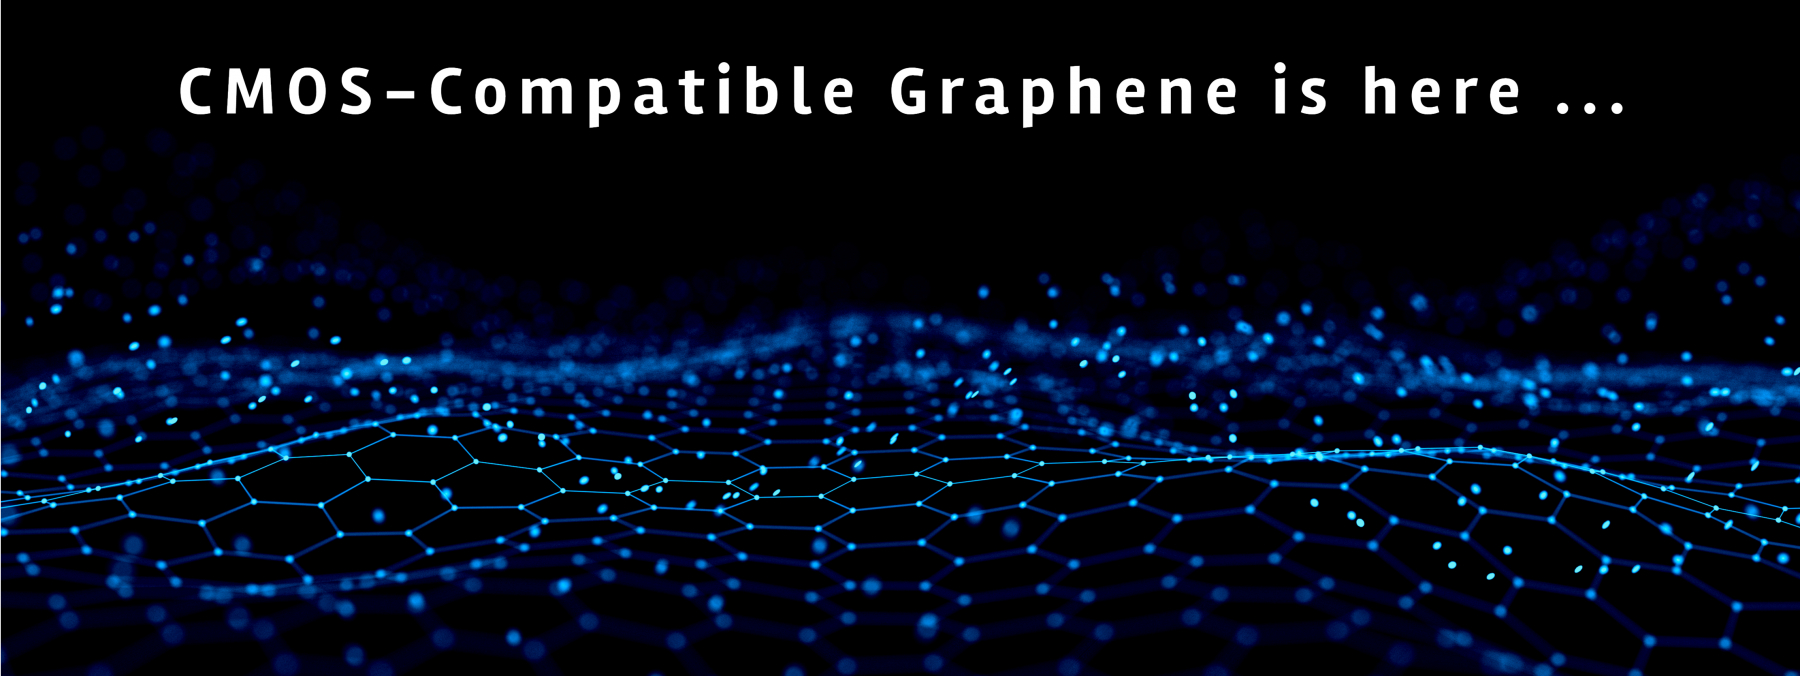 Graphene synthesis